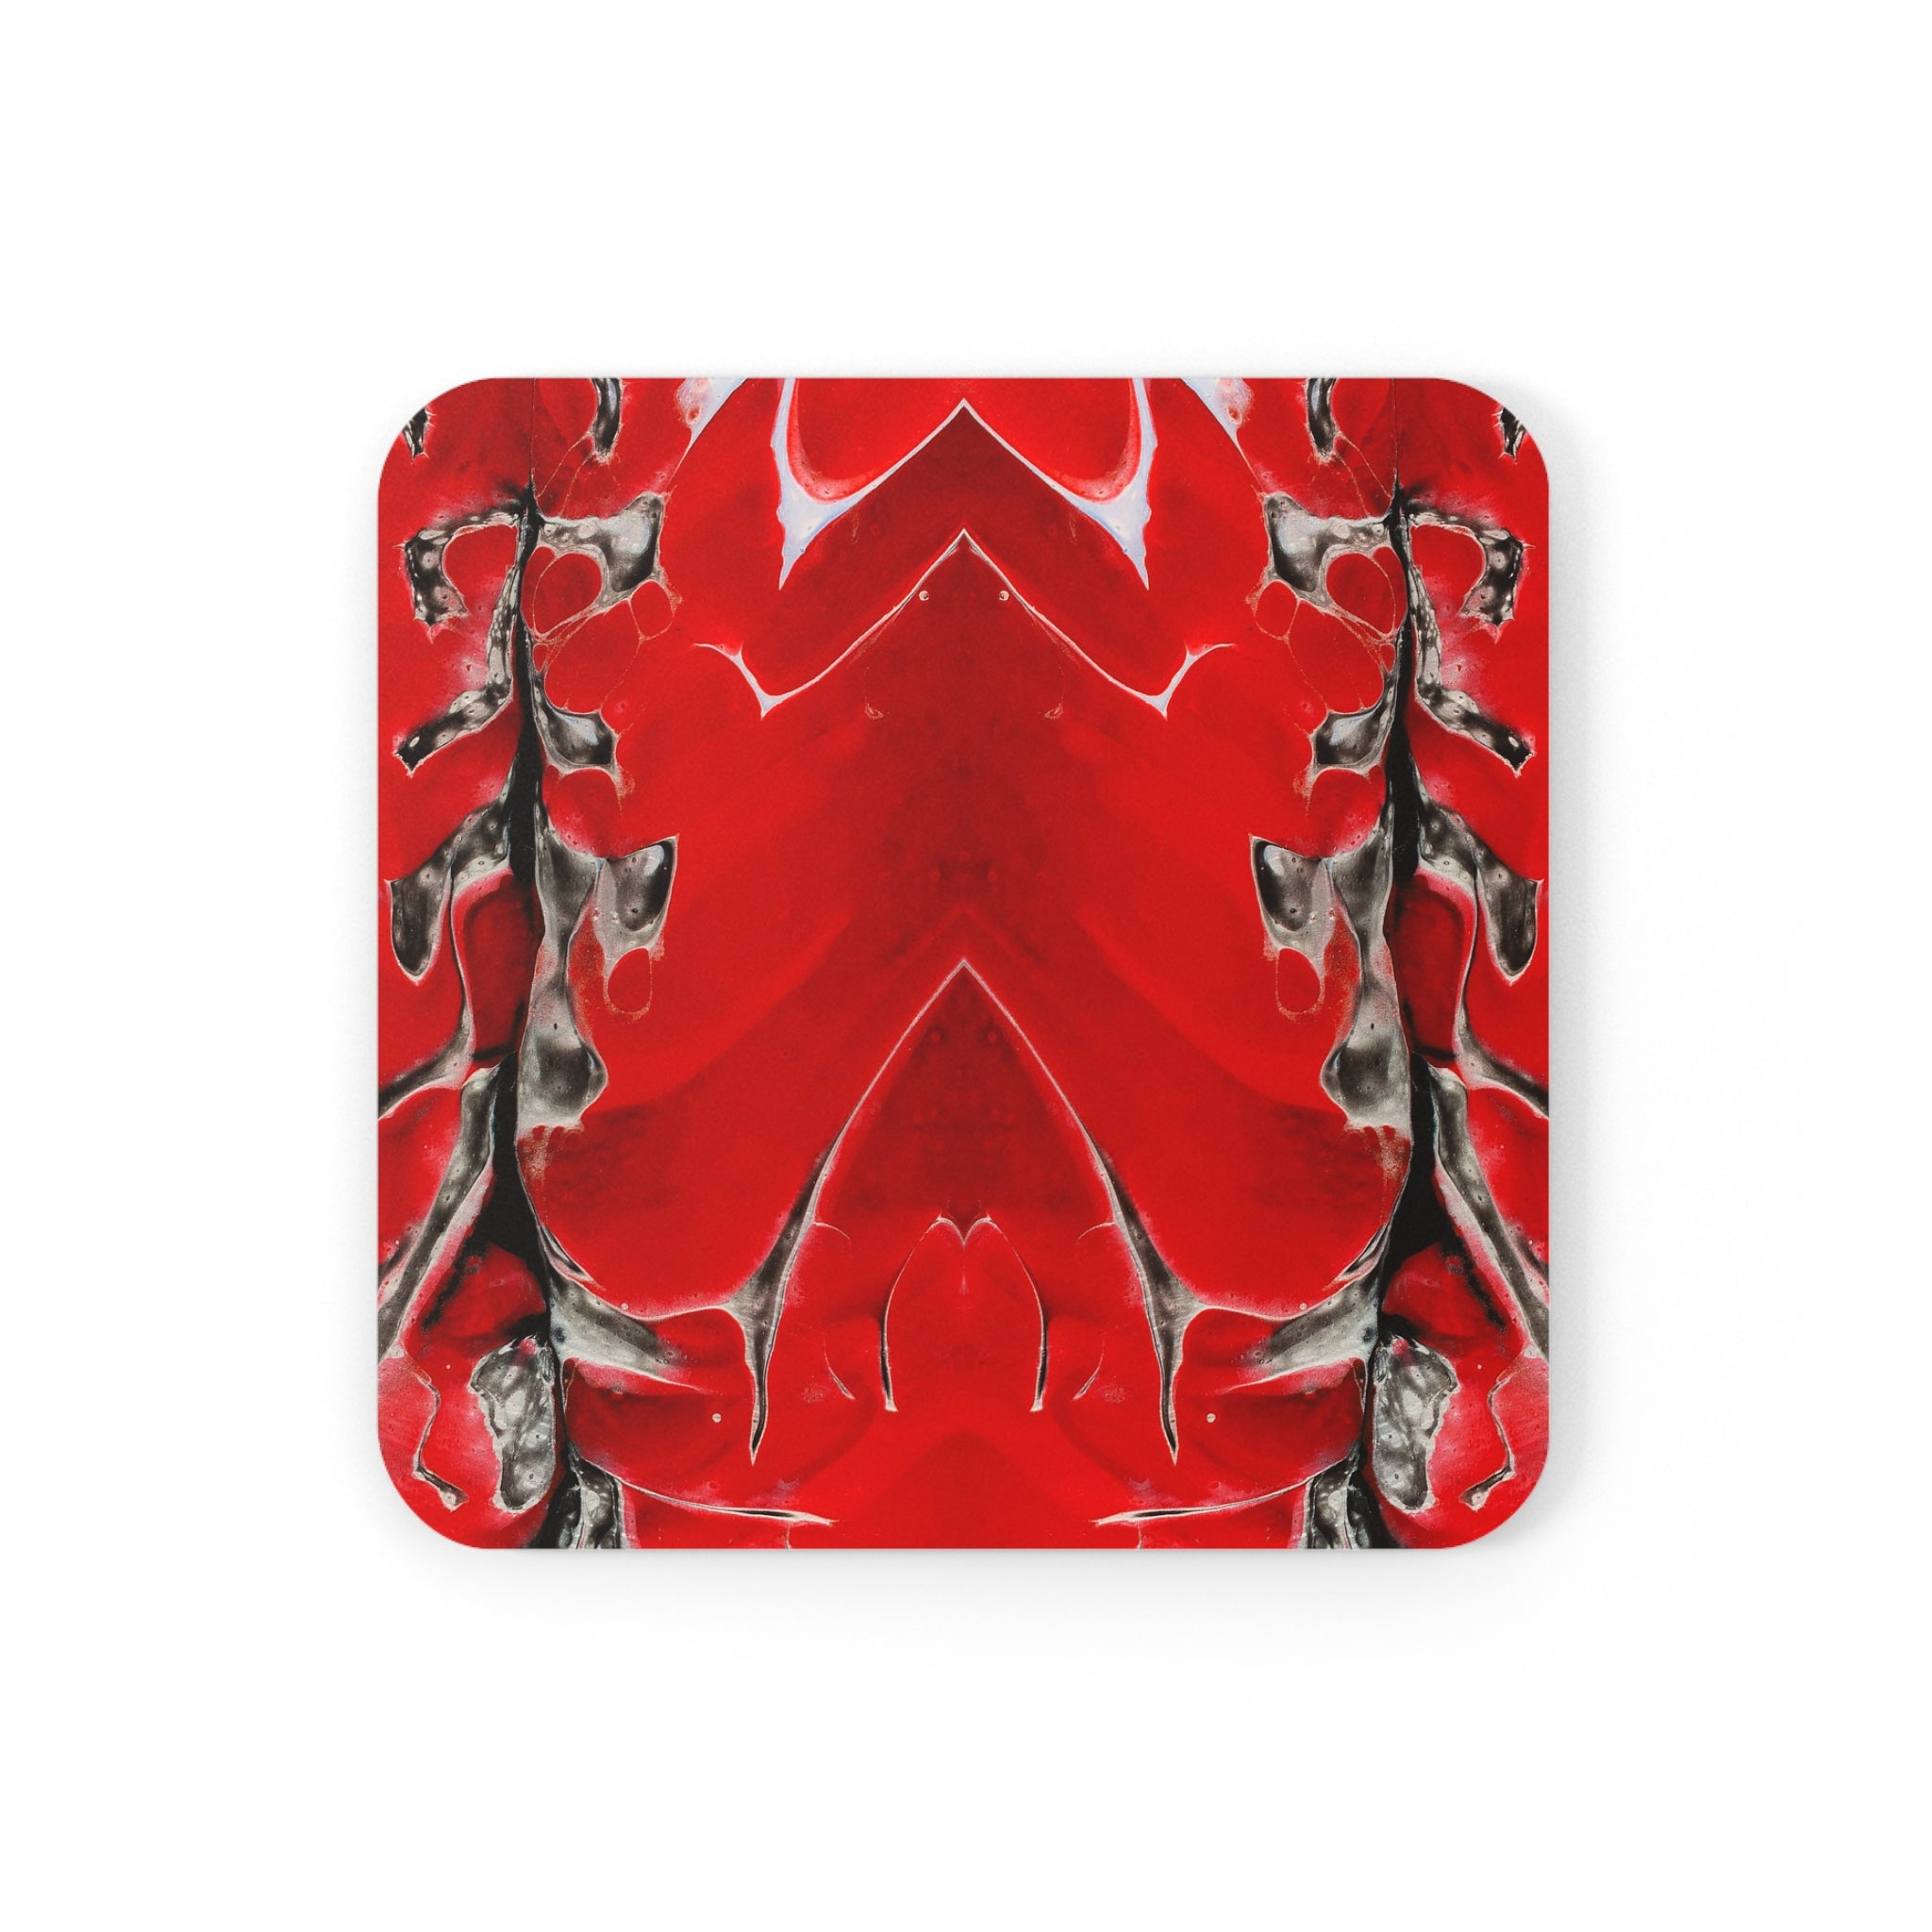 Cameron Creations - Splitting Tongues - Stylish Coffee Coaster - Square Front